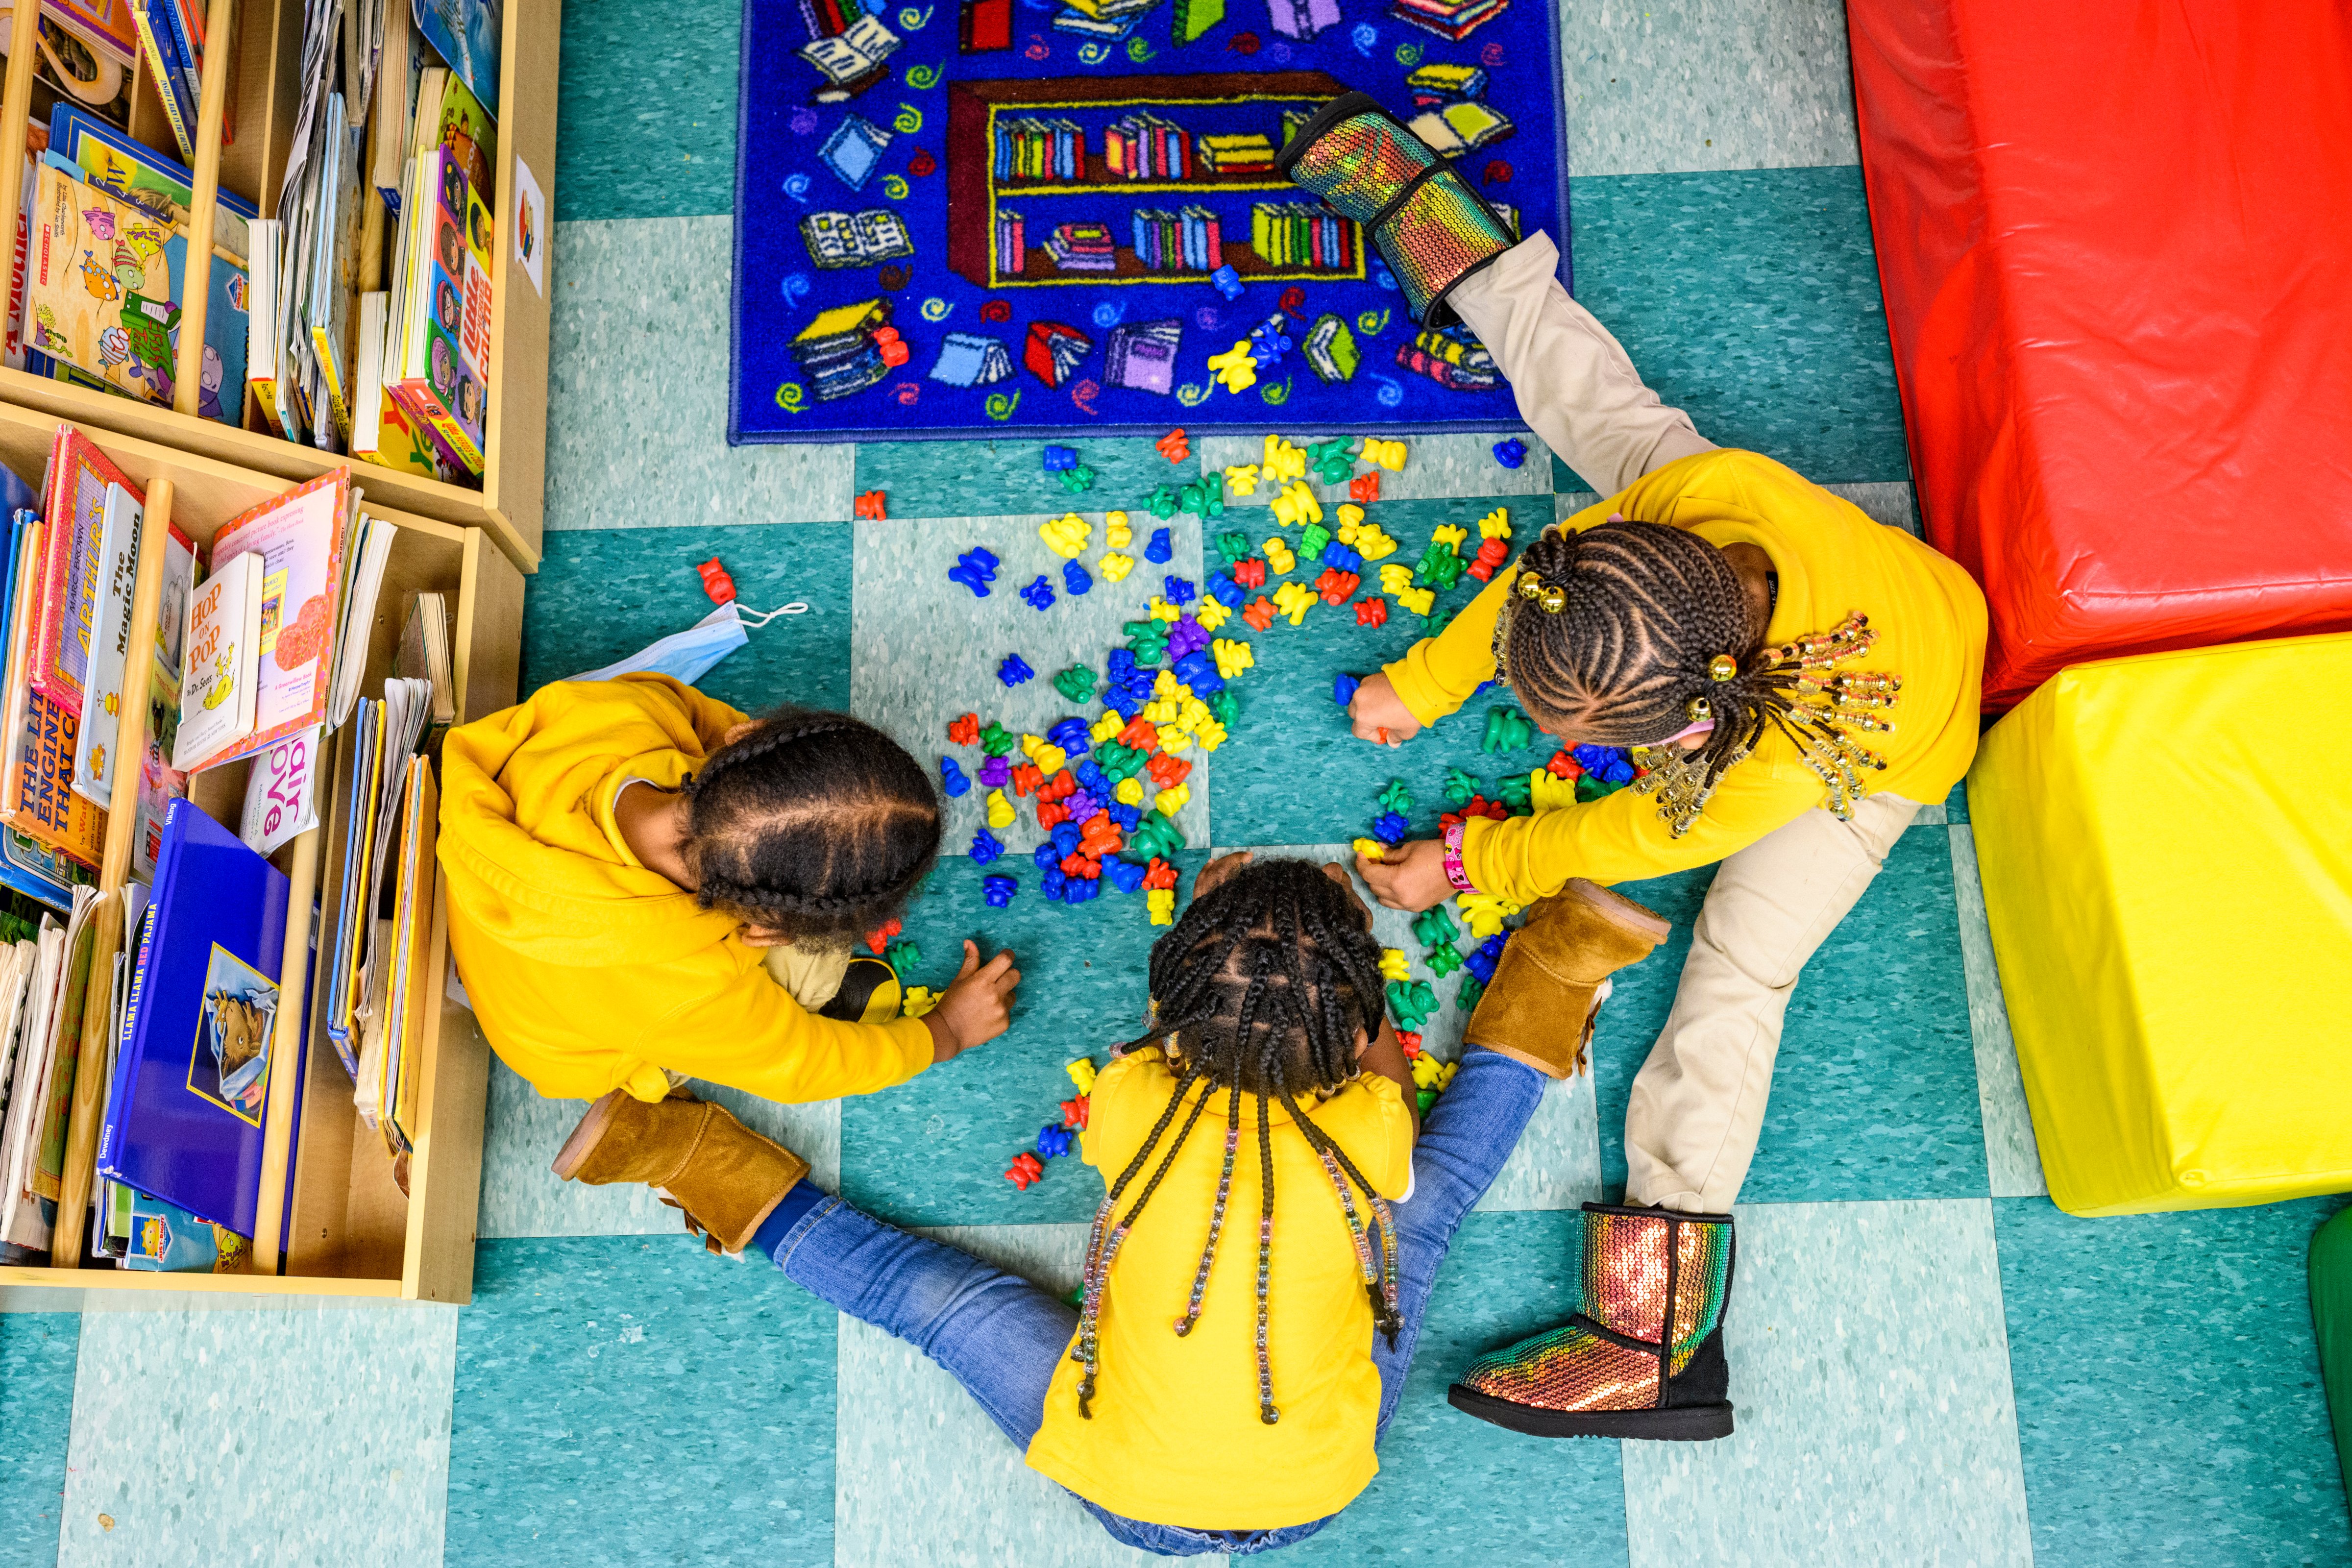 Children play in a three-year-olds' class at Little Flowers Early Childhood and Development Center located in Baltimore, Maryland, on January 11, 2021. (Photo by Matt Roth for The Washington Post via Getty Images)